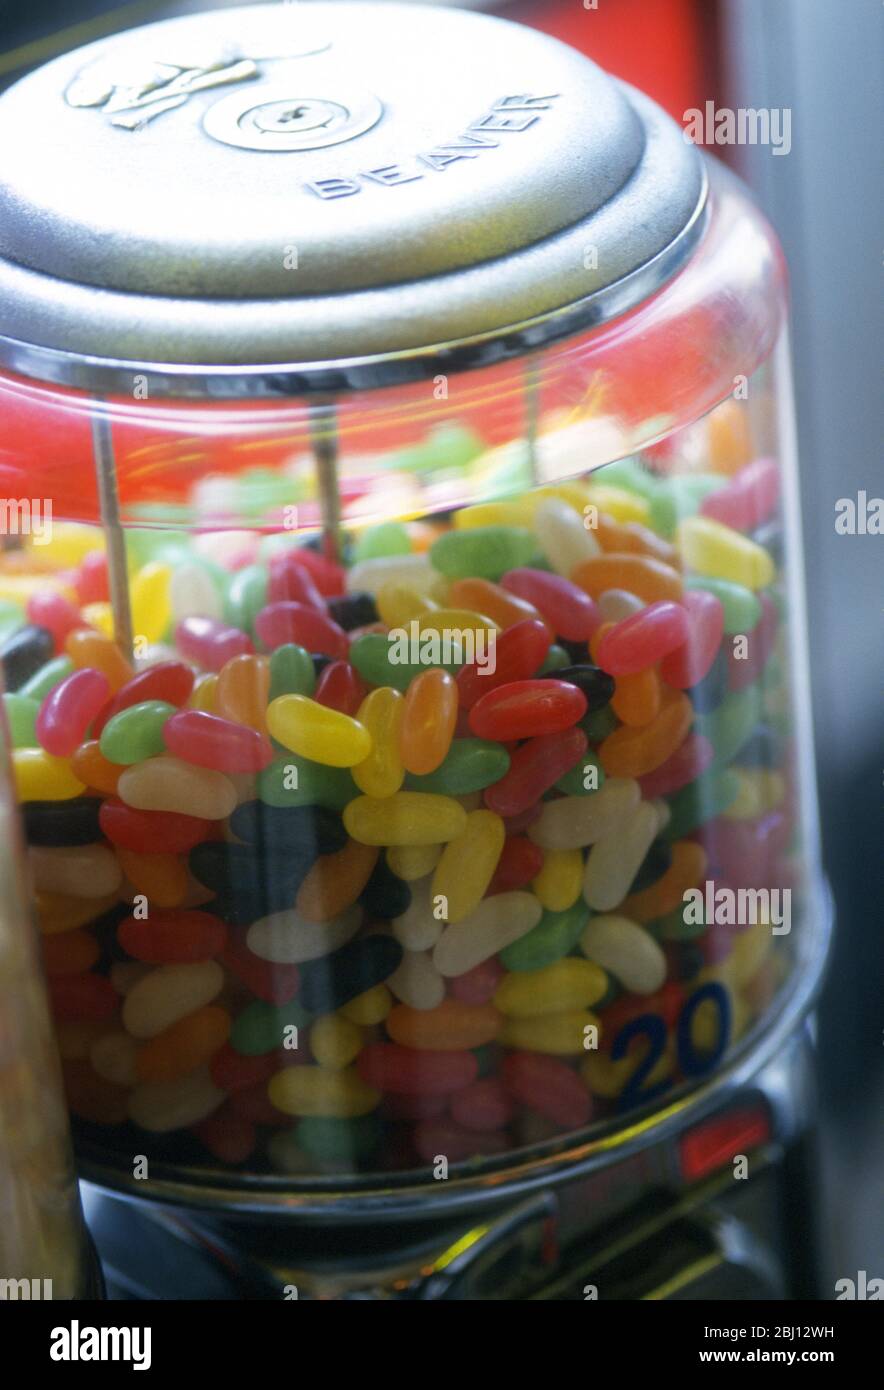 Jelly beans in a jar - Stock Photo